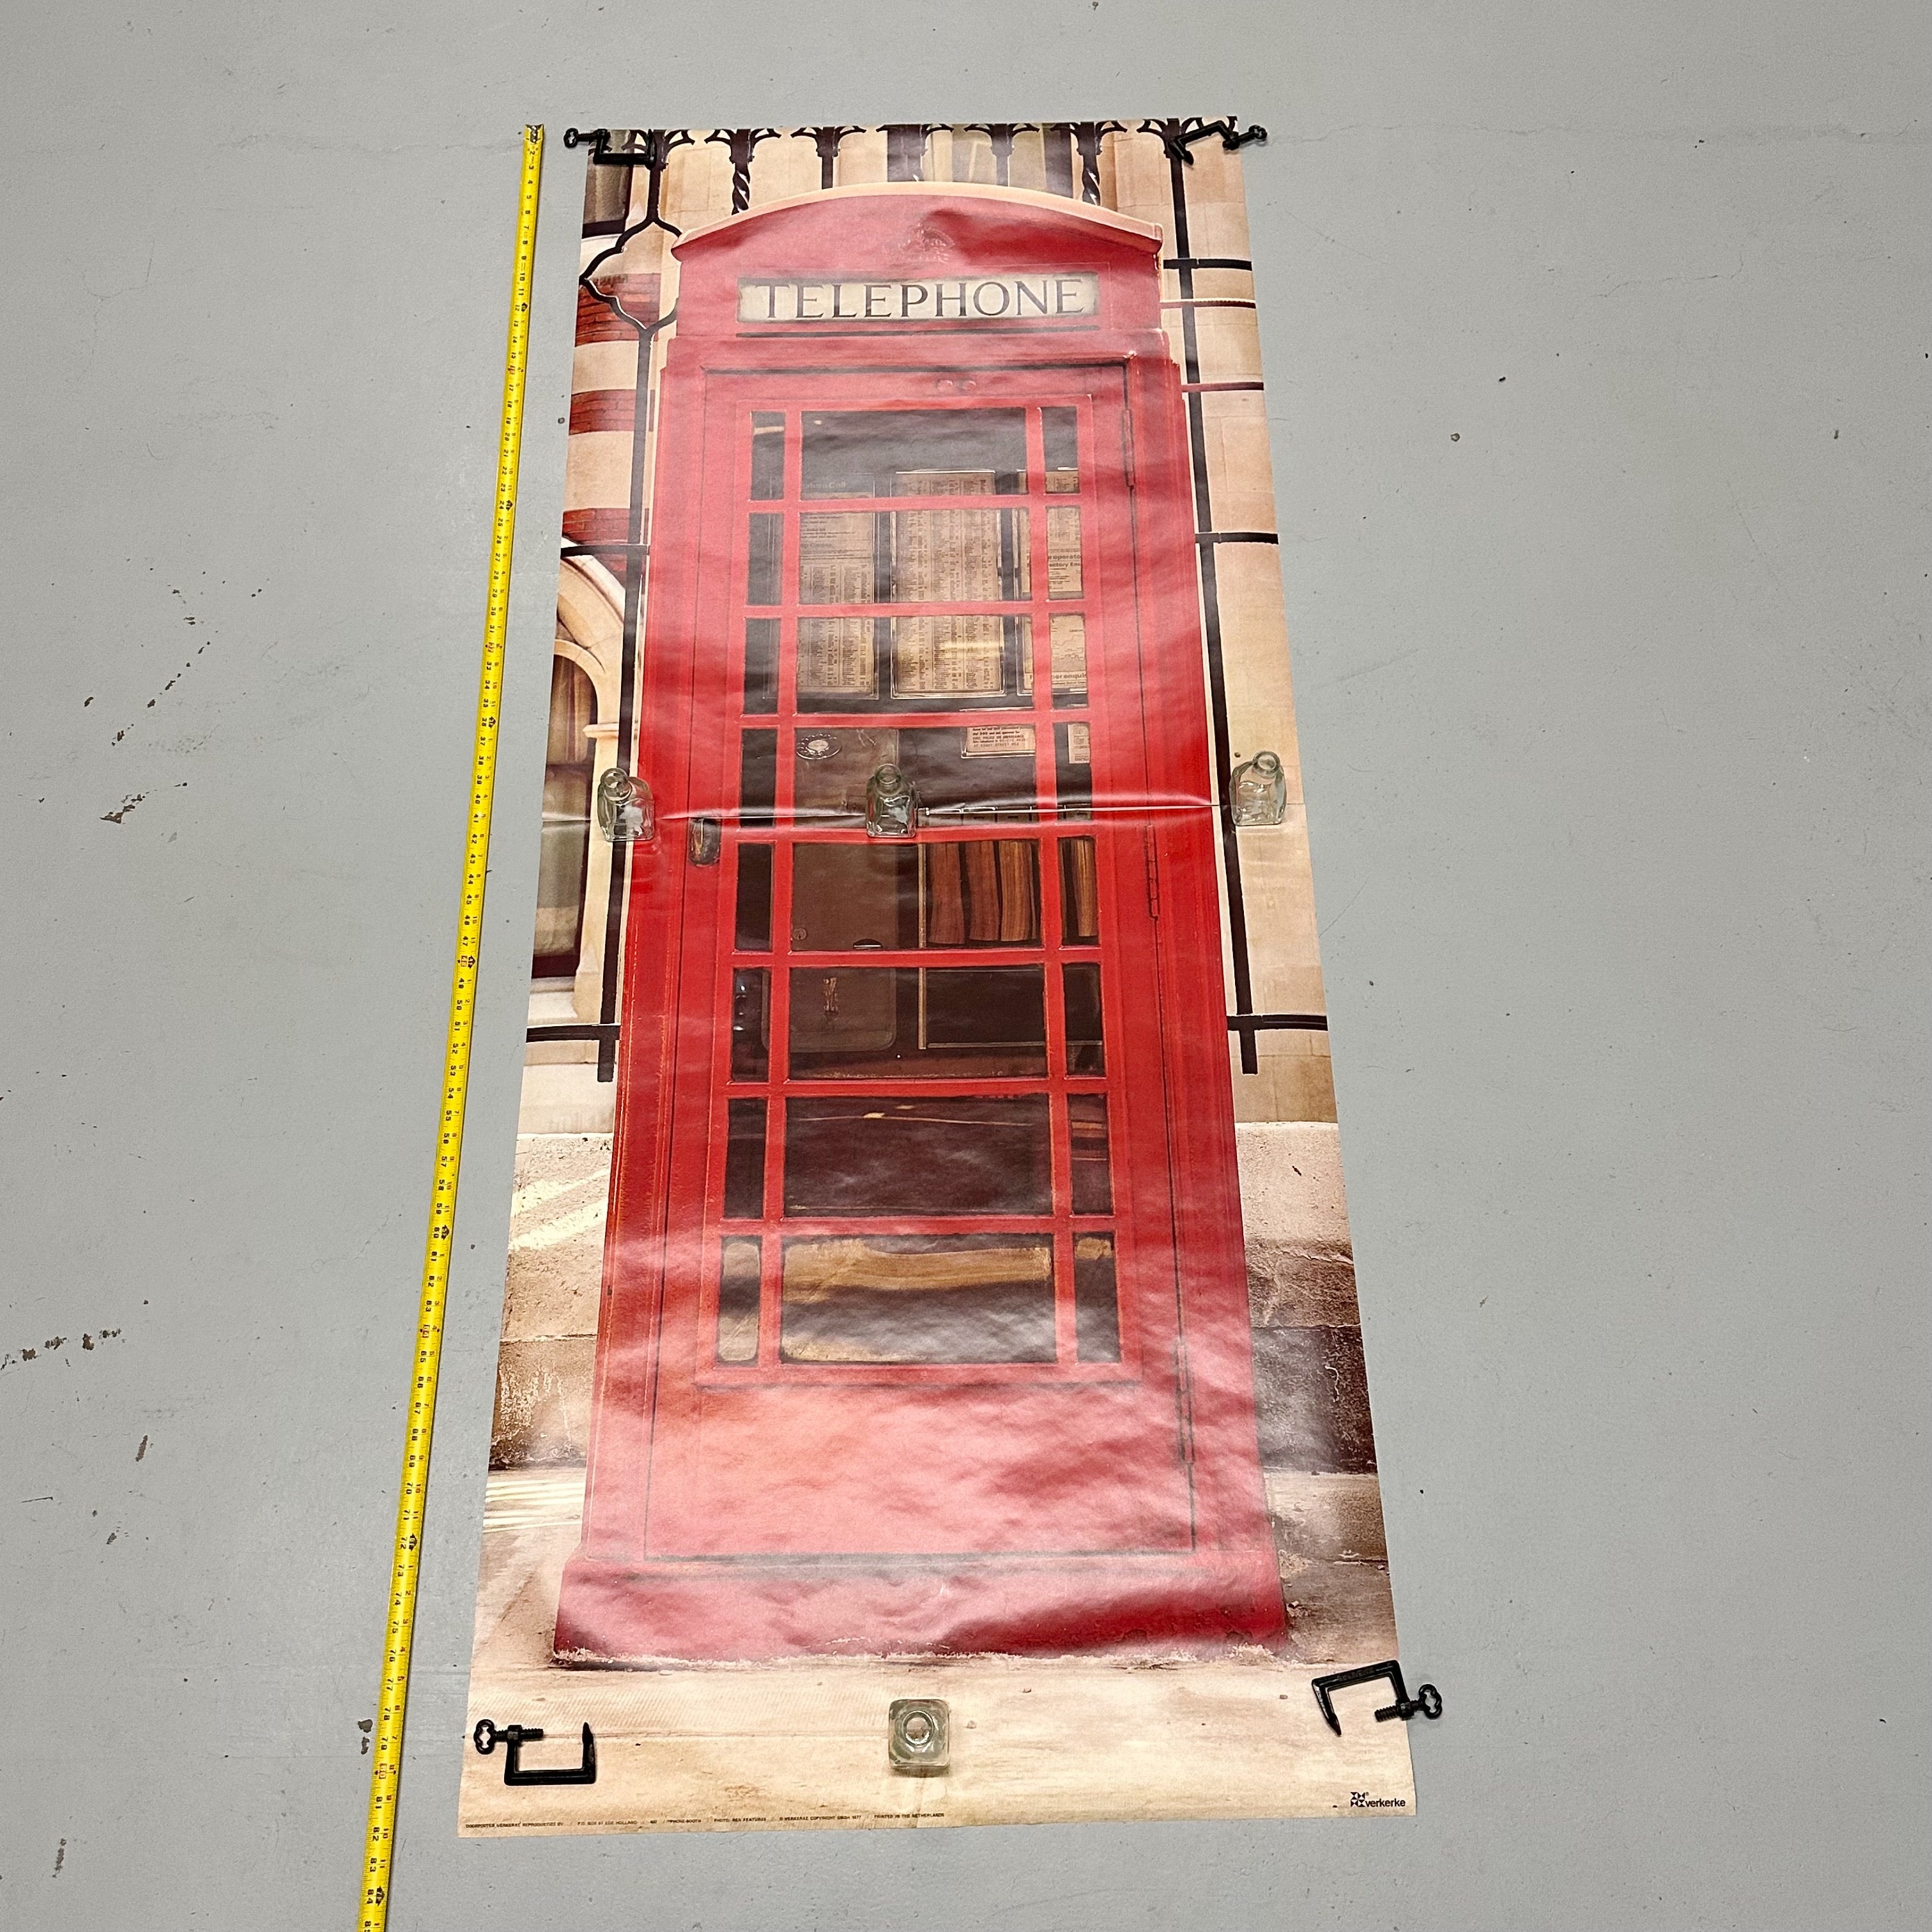 Rare 1970s London Red Telephone Booth Poster by Verkerke - Banksy Art - Massive Wall Size - 82" x 34"  - 1977 - Vintage European Posters Banksy